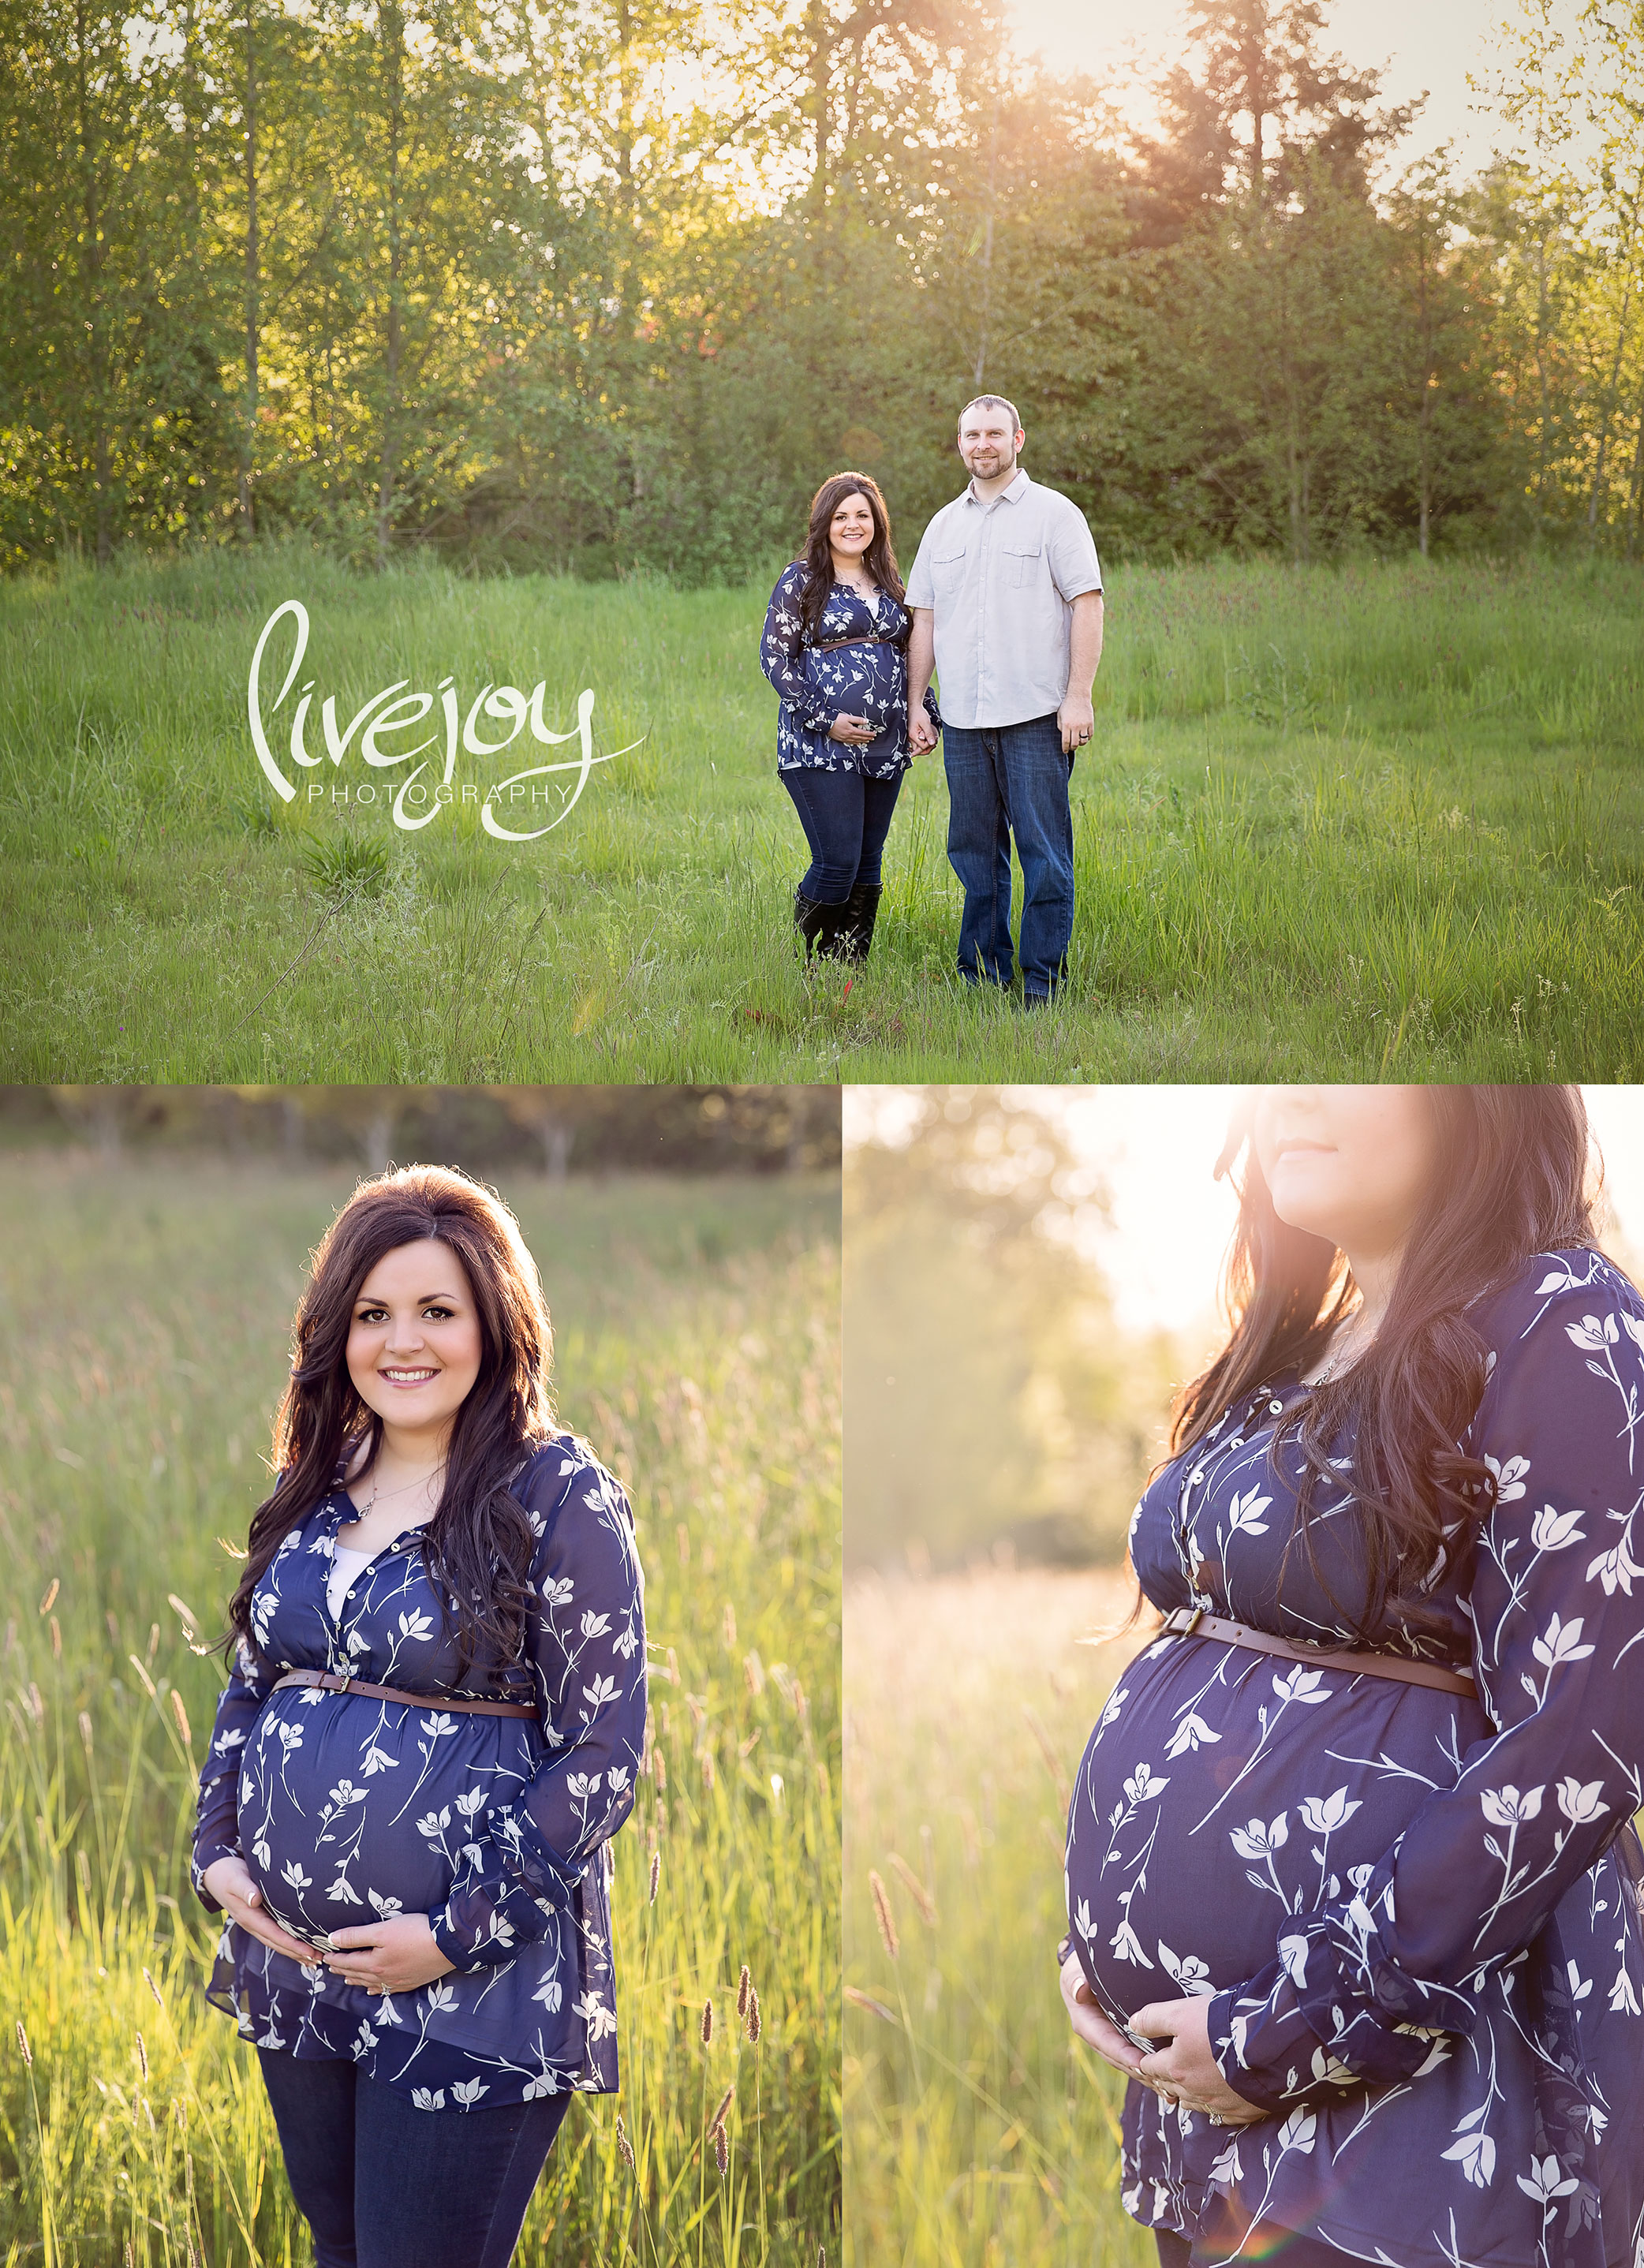 Maternity and Pregnancy Images | Oregon | LiveJoy Photography